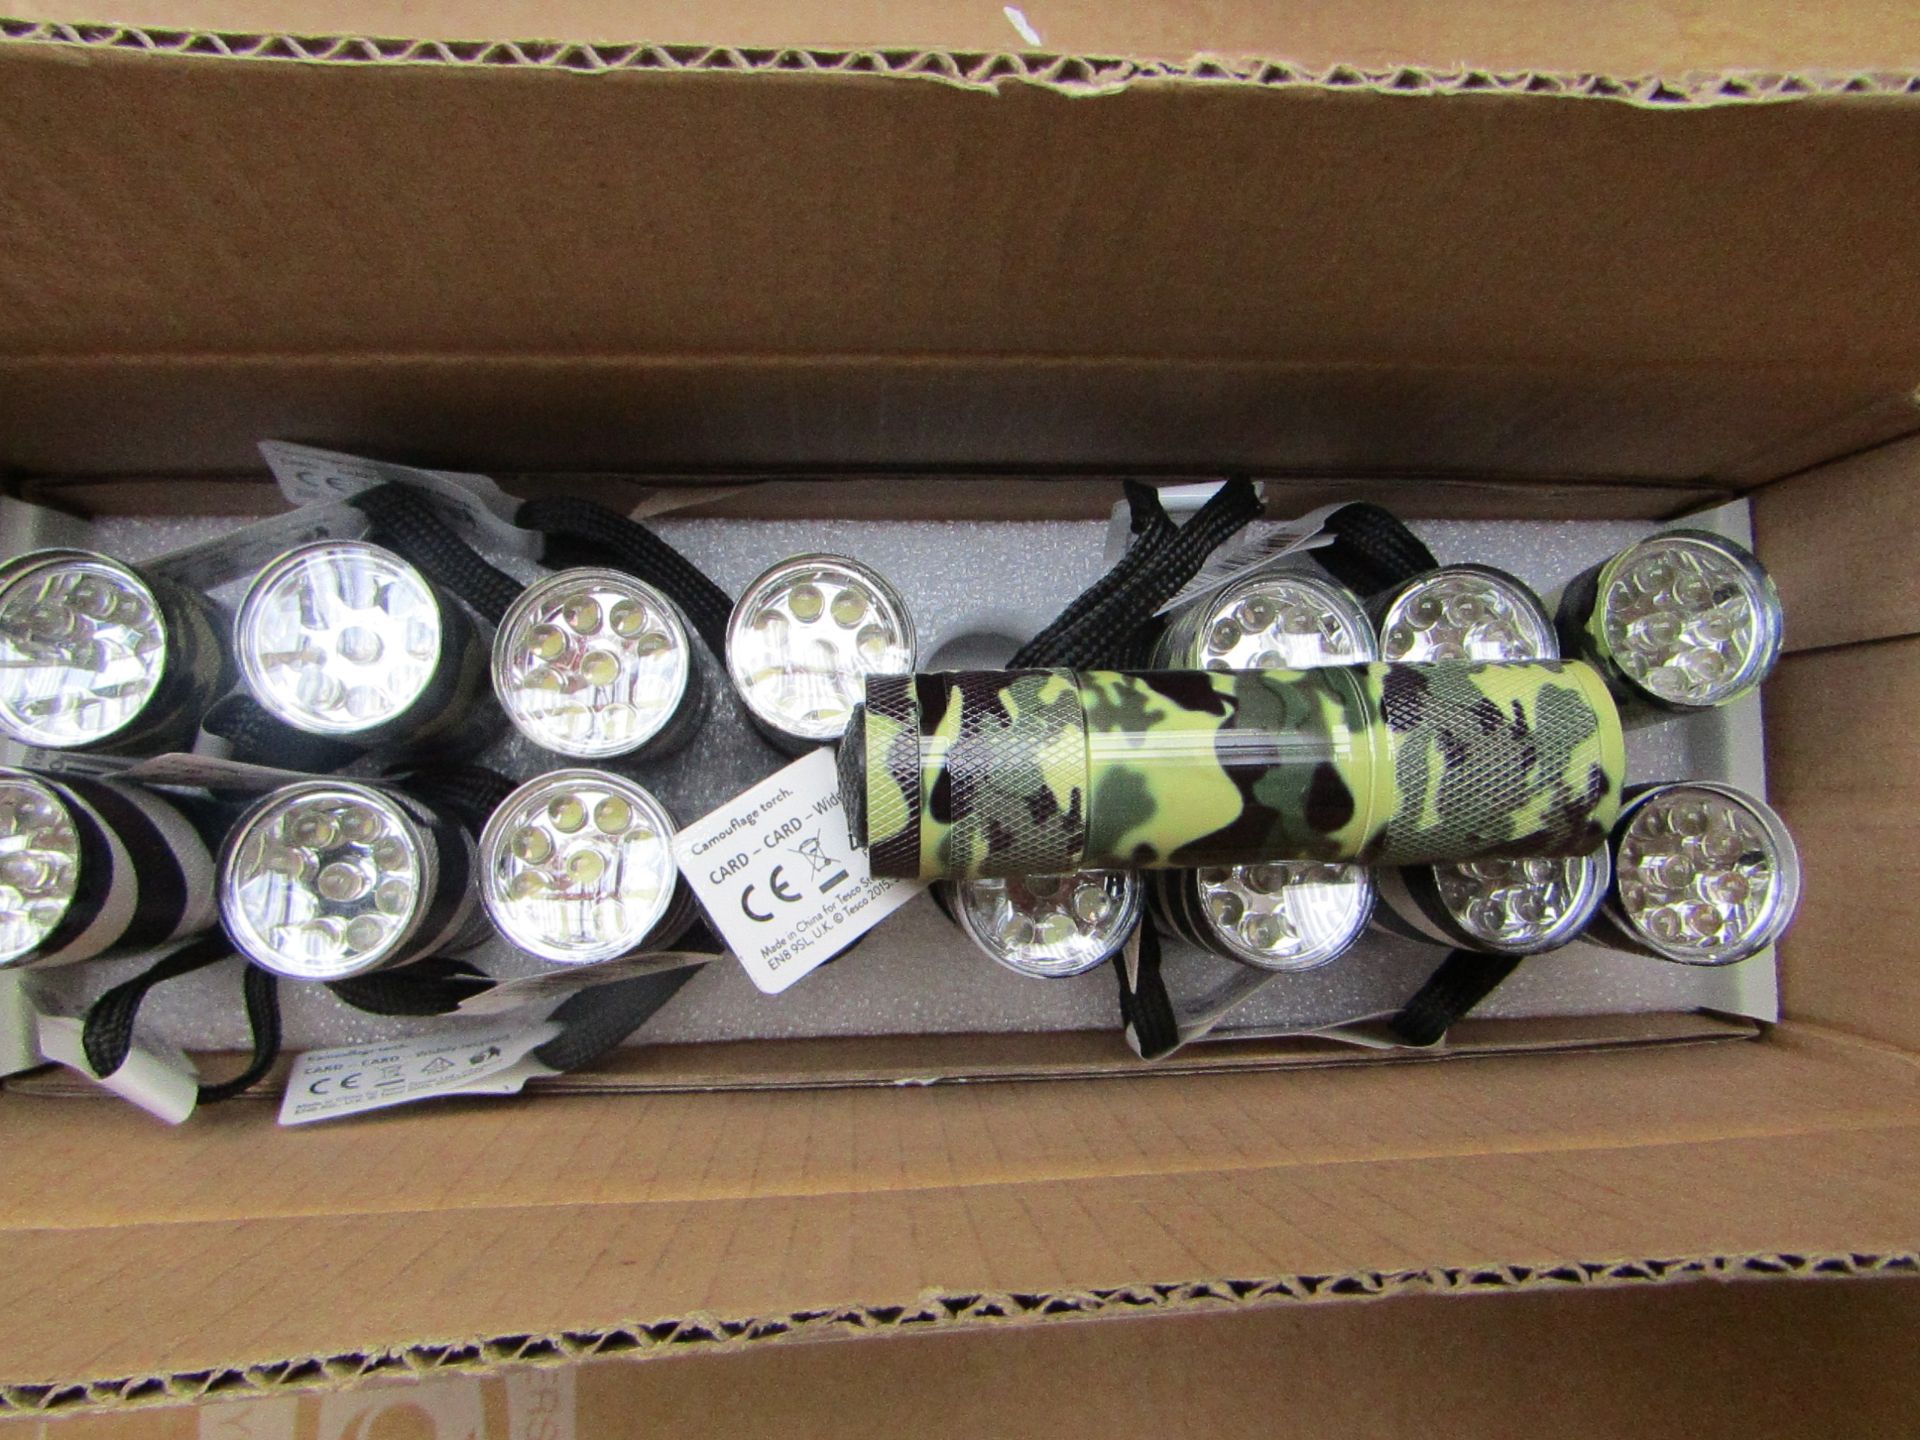 16x Tesco LED camoflauge torches, all new and boxed.